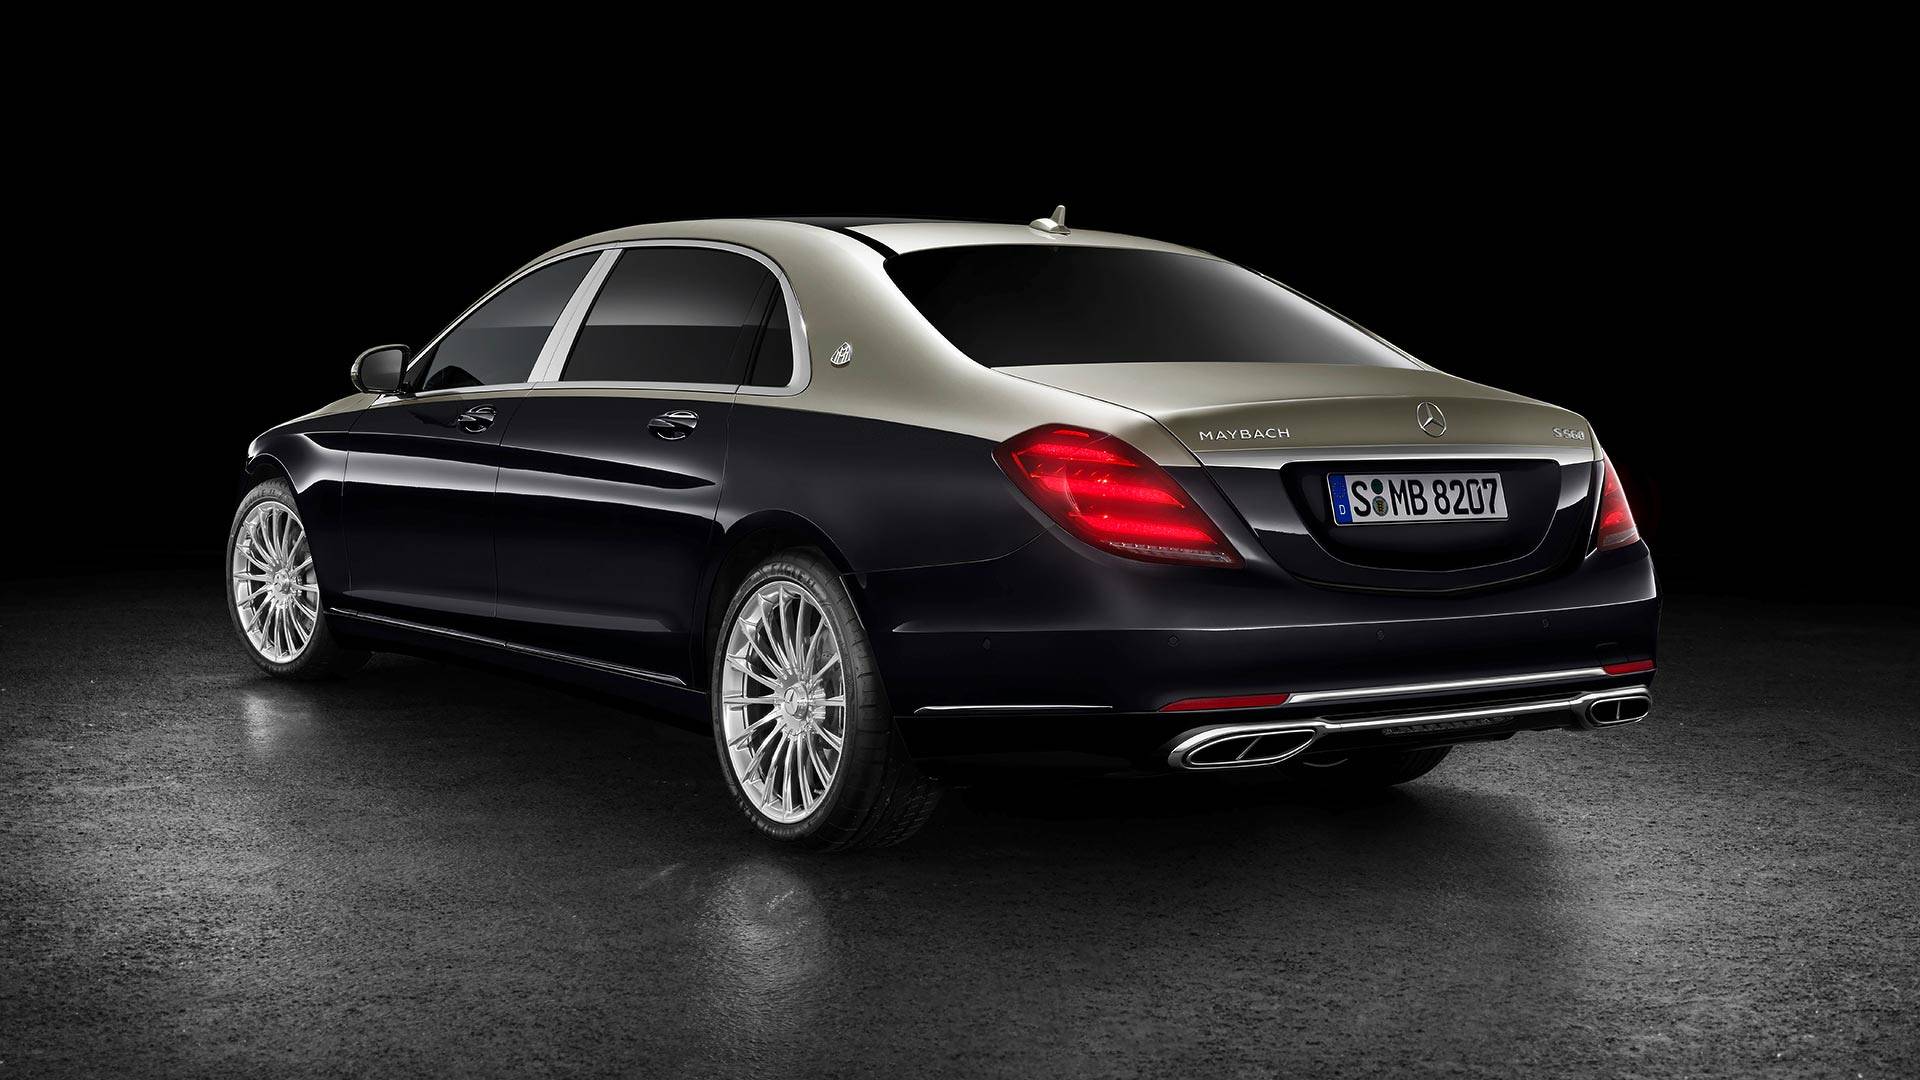 2019-Mercedes-Maybach-S-Class-arrives-in-style-2.jpg